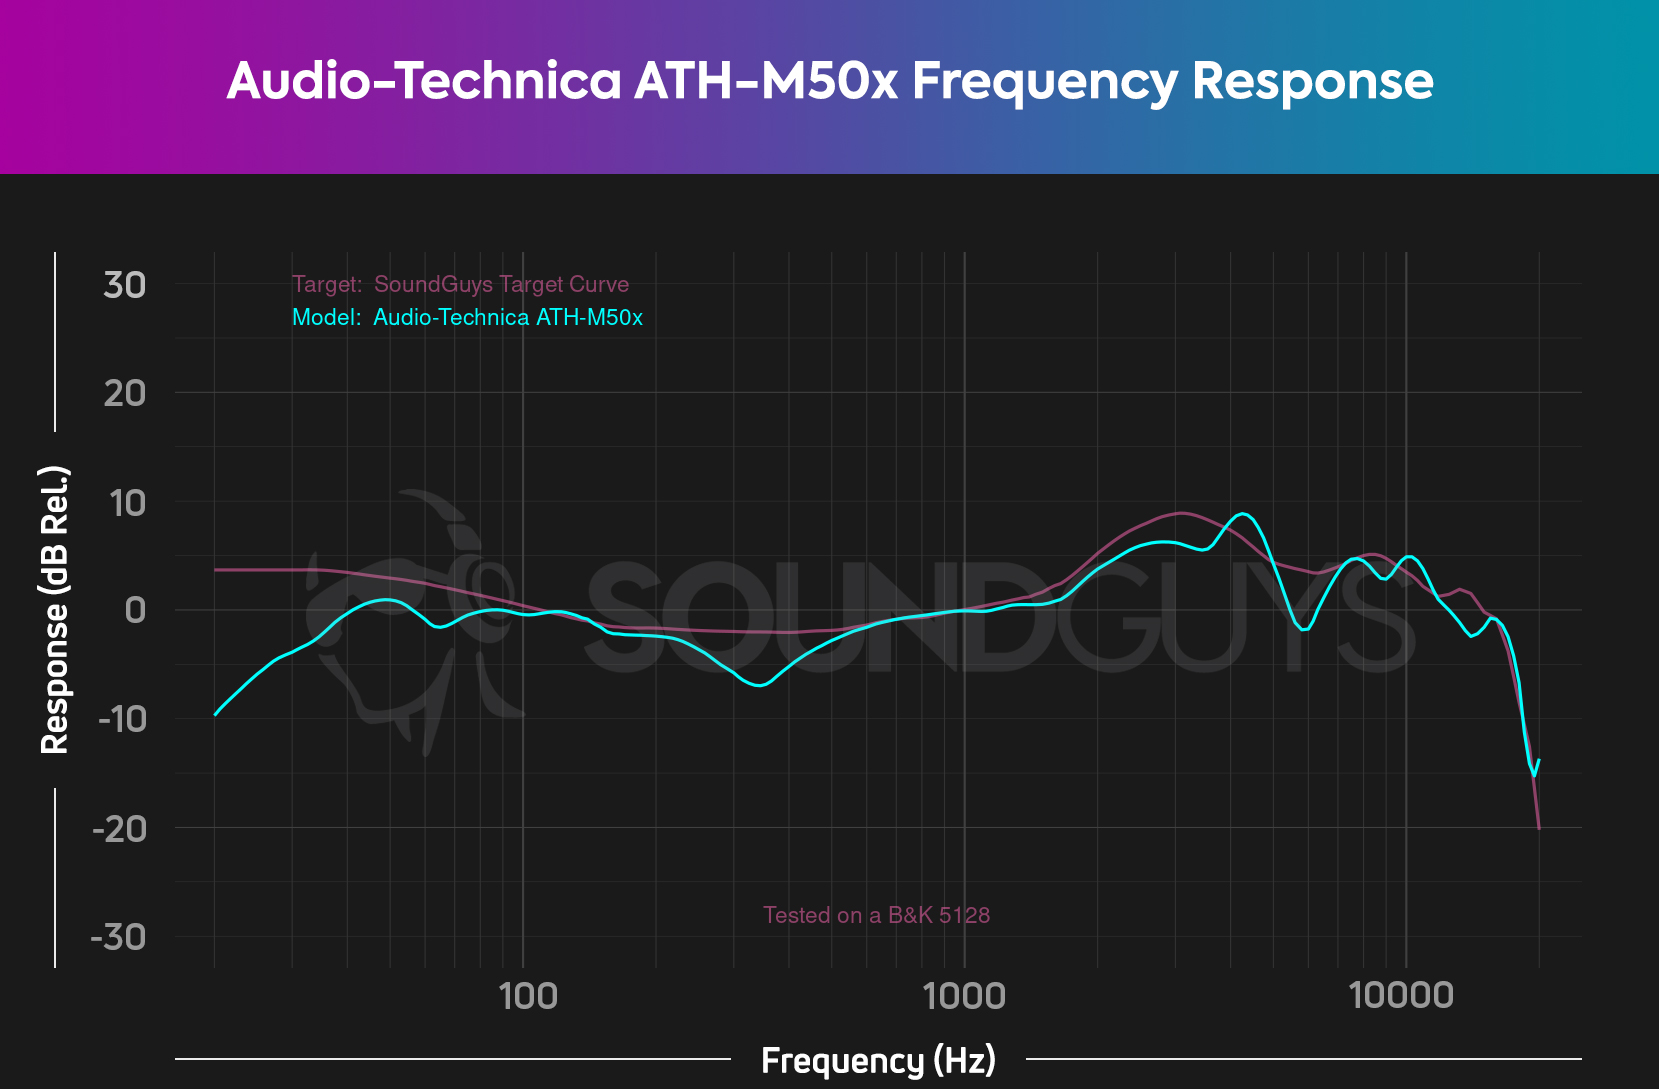 The chart shows the frequency response of the Audio-Technica ATH-M50x versus our target curve.